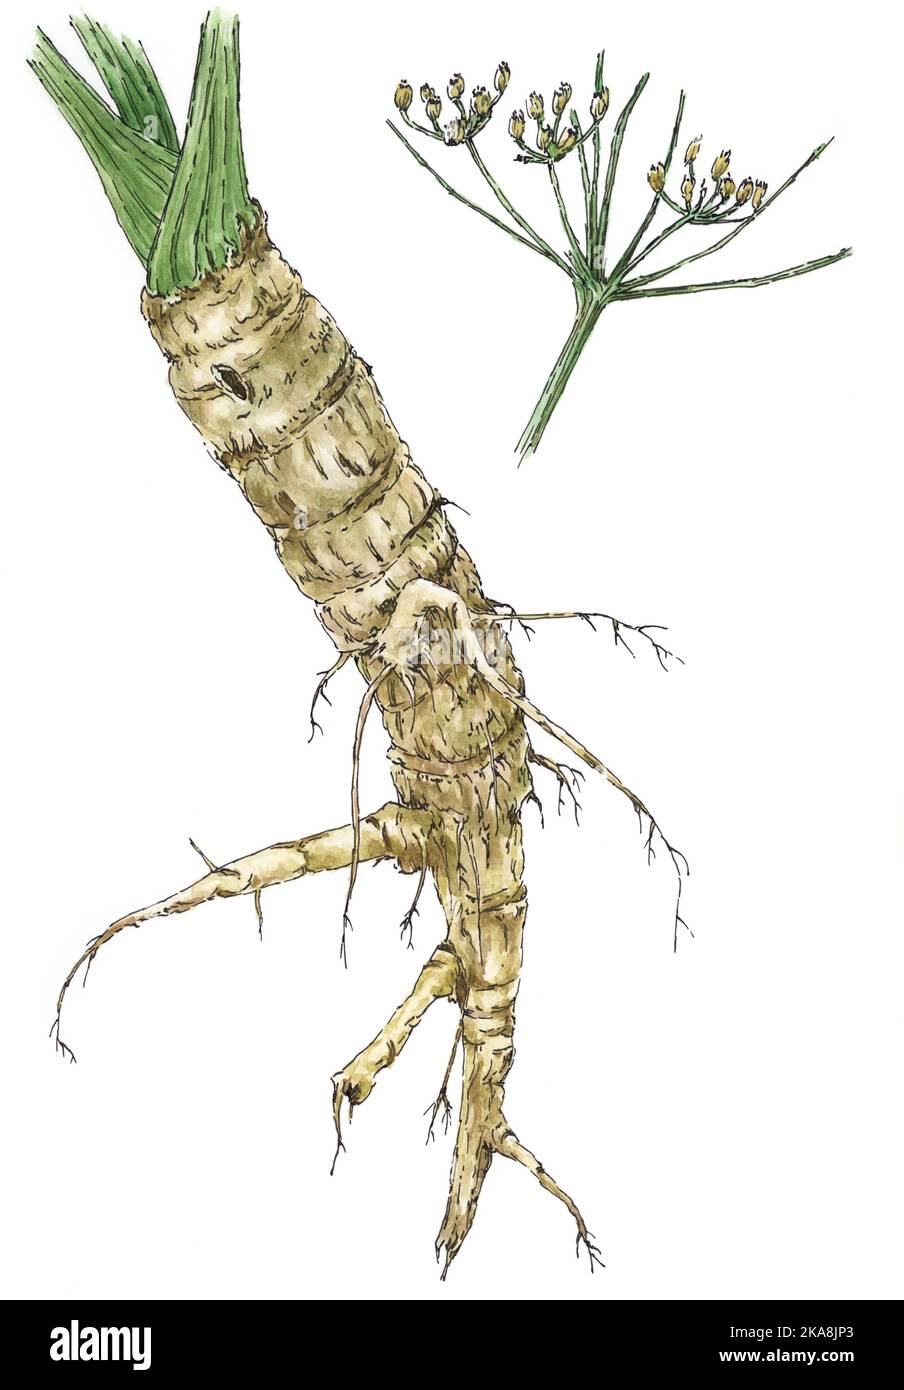 Parsnip (Pastinaca sativa) root and fruits. Ink and watercolor on paper. Stock Photo